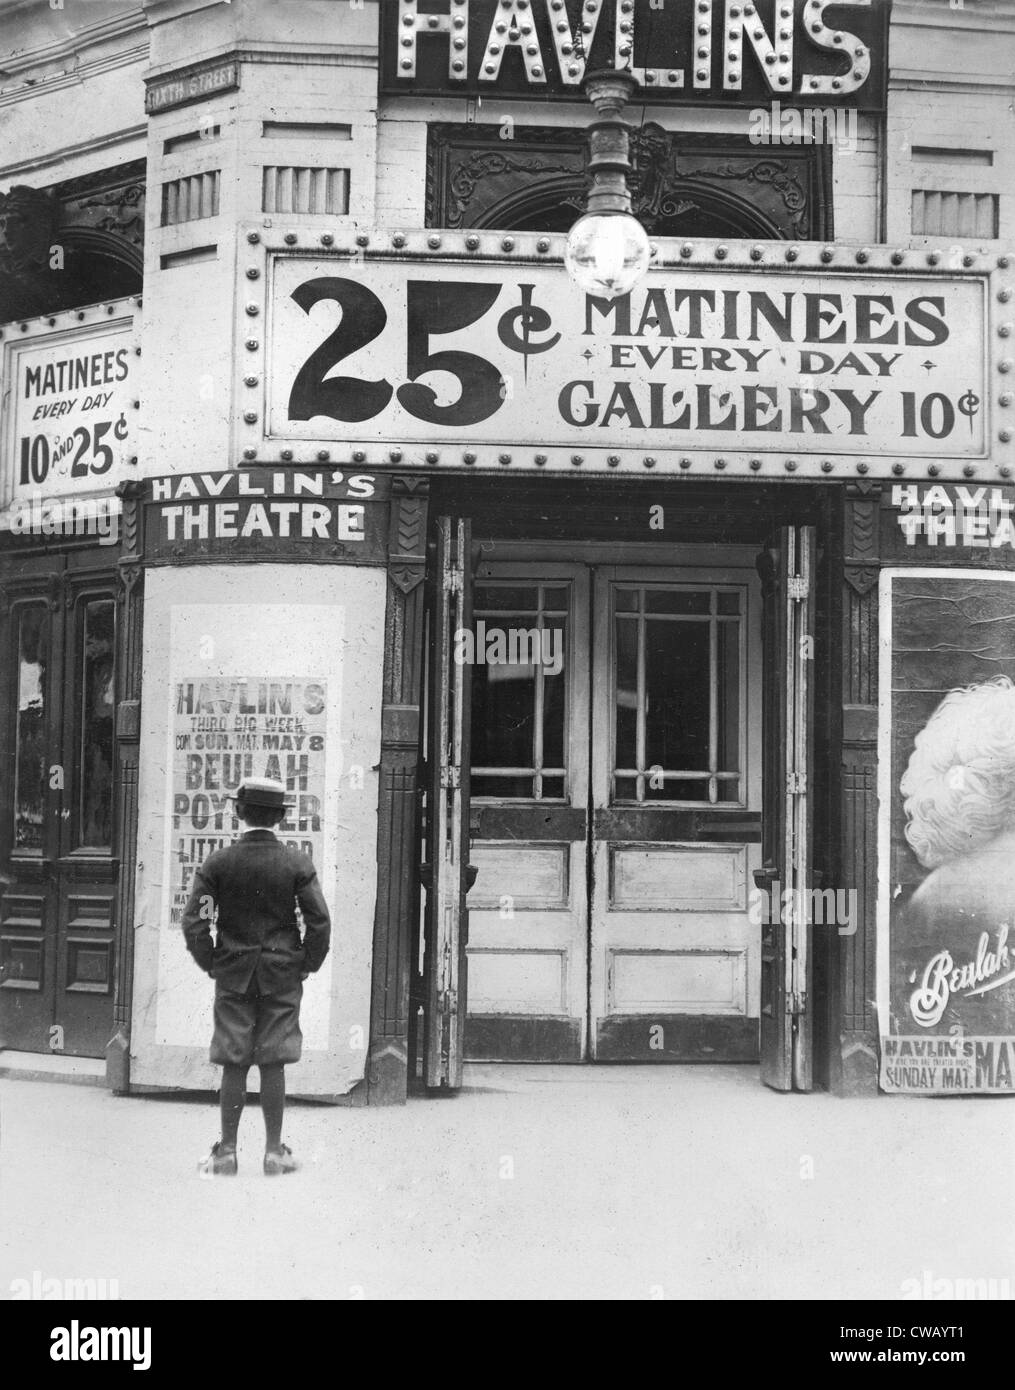 Boy in front of a movie theater showing a film with Beulah Poynter, original caption quote: 'Where the boys spend their money', Stock Photo